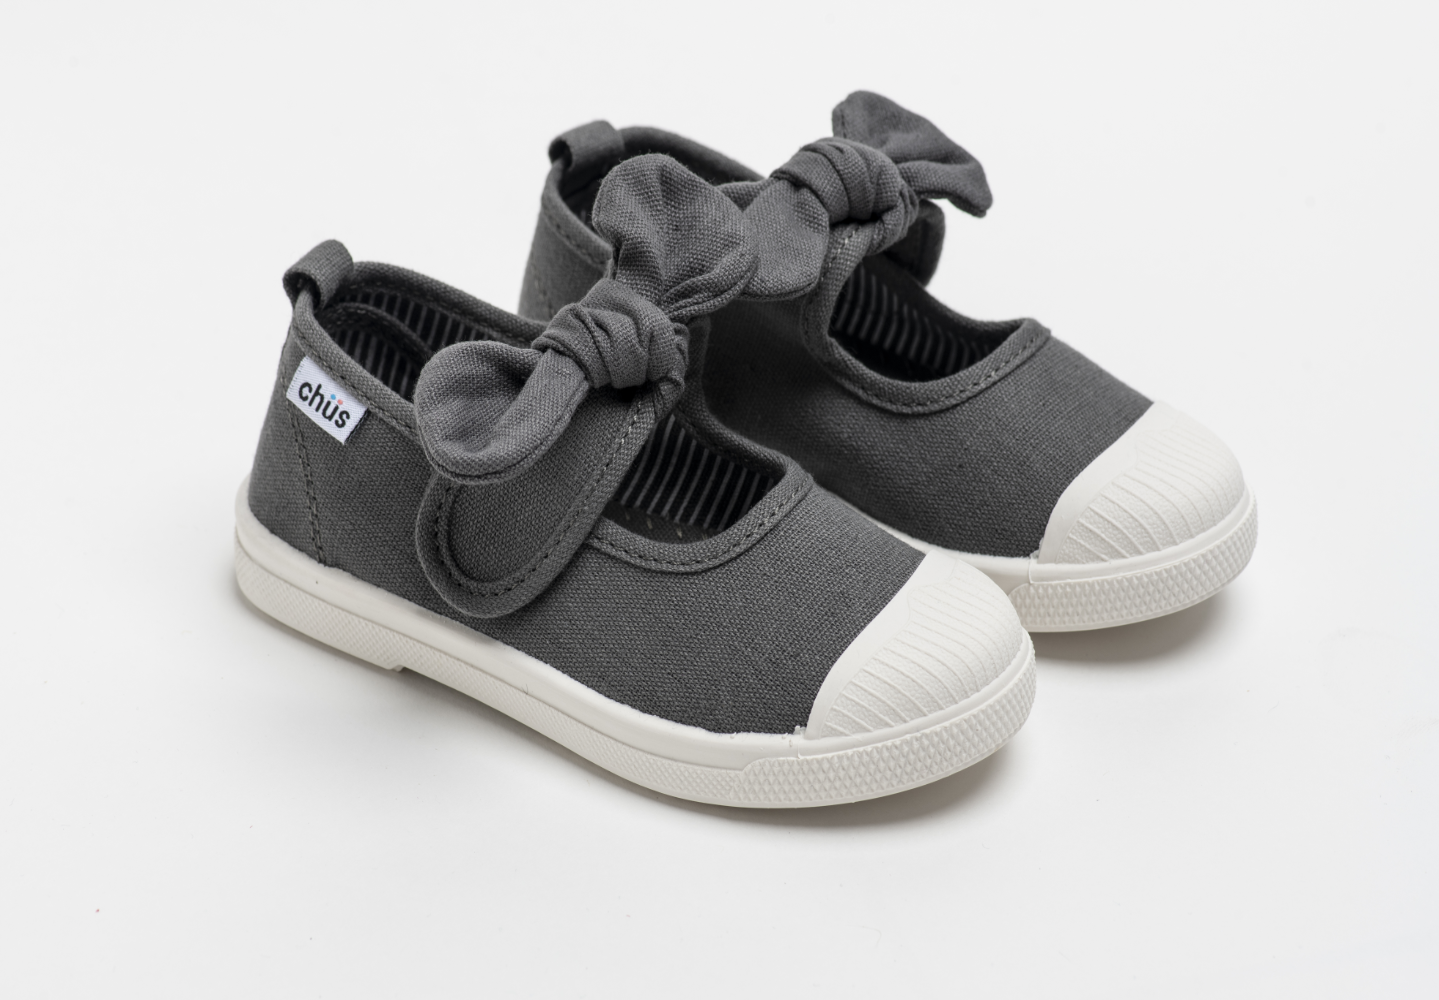 Buy Pine Kids Sneakers Shoes With Velcro Closure Grey for Boys (5-5Years)  Online, Shop at FirstCry.com - 13815087